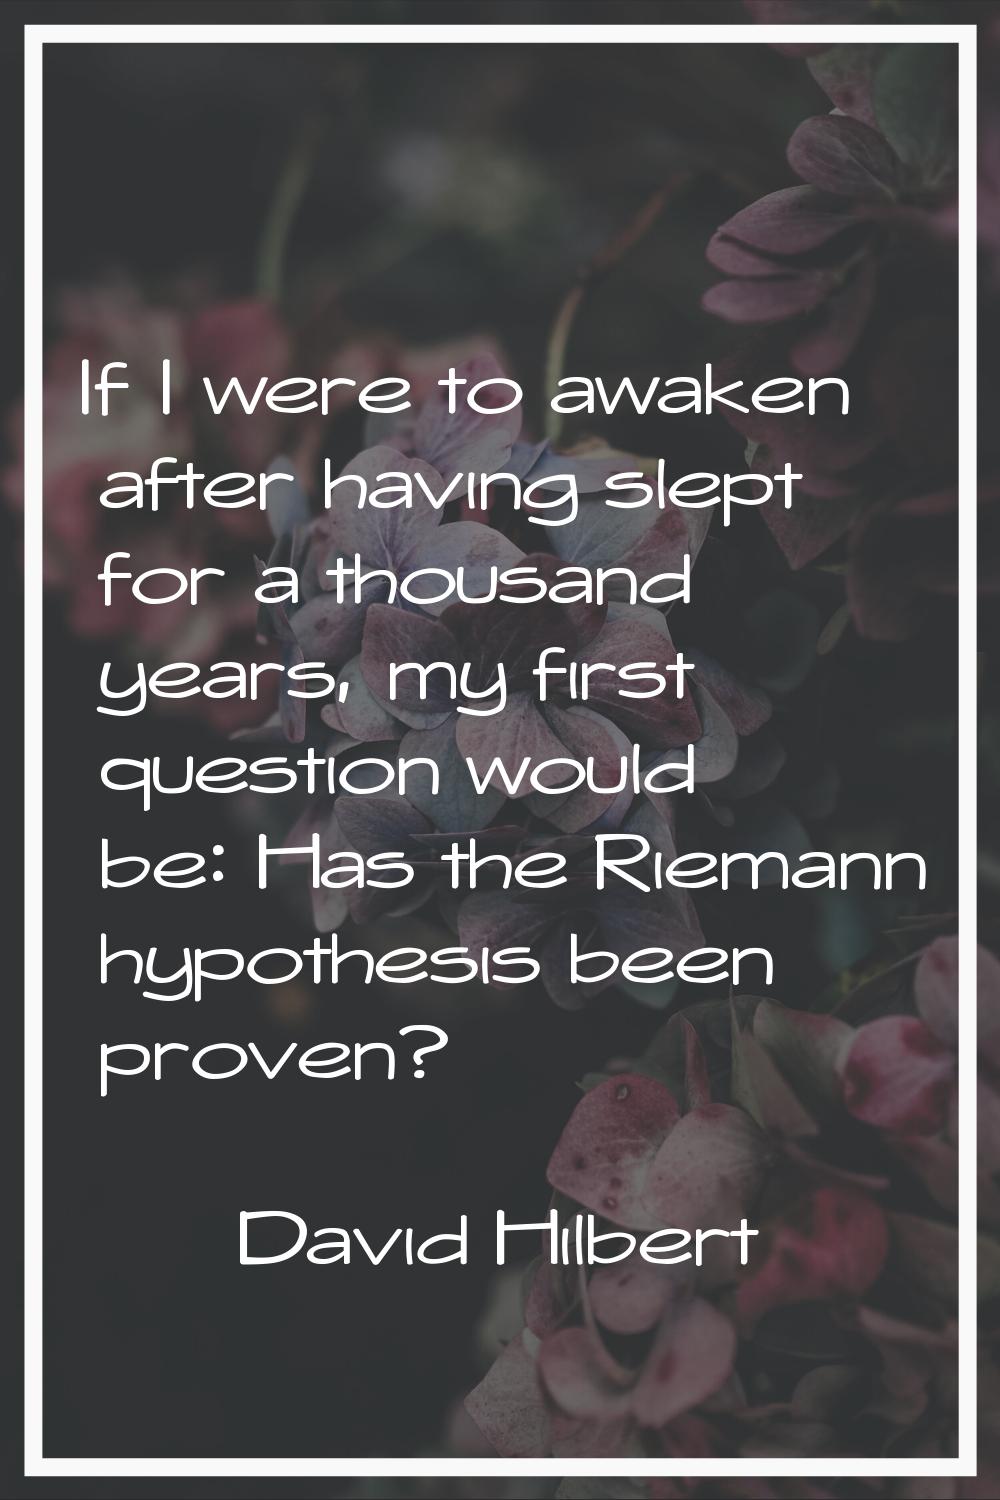 If I were to awaken after having slept for a thousand years, my first question would be: Has the Ri